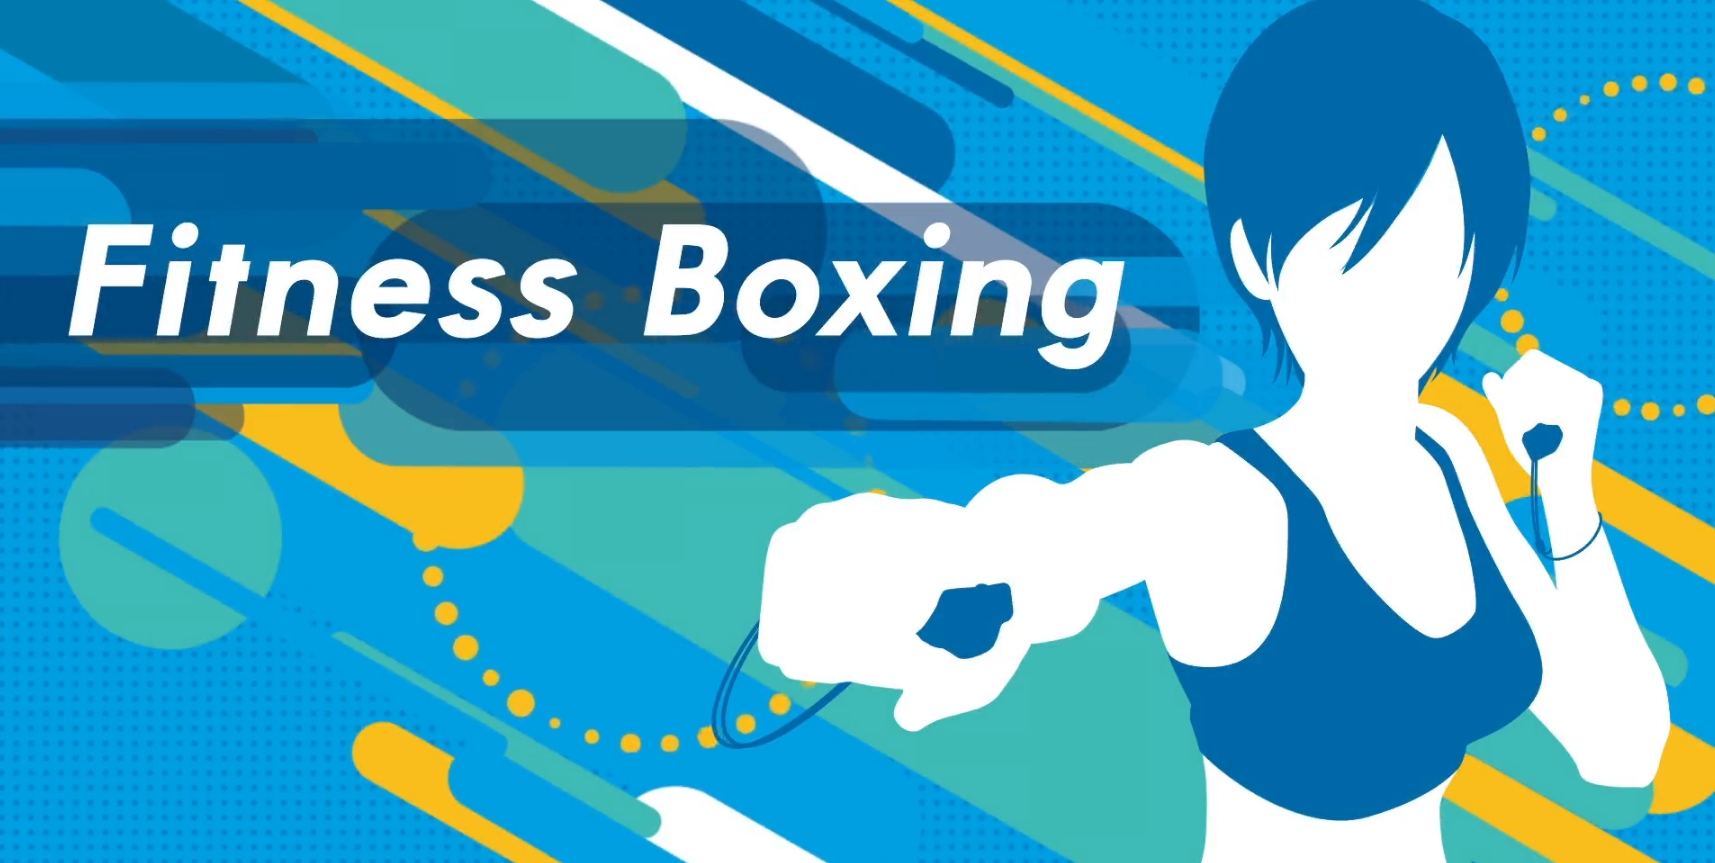 Fitness Boxing Releases Series Of Training Mode Videos Featuring Japanese Voice Actors